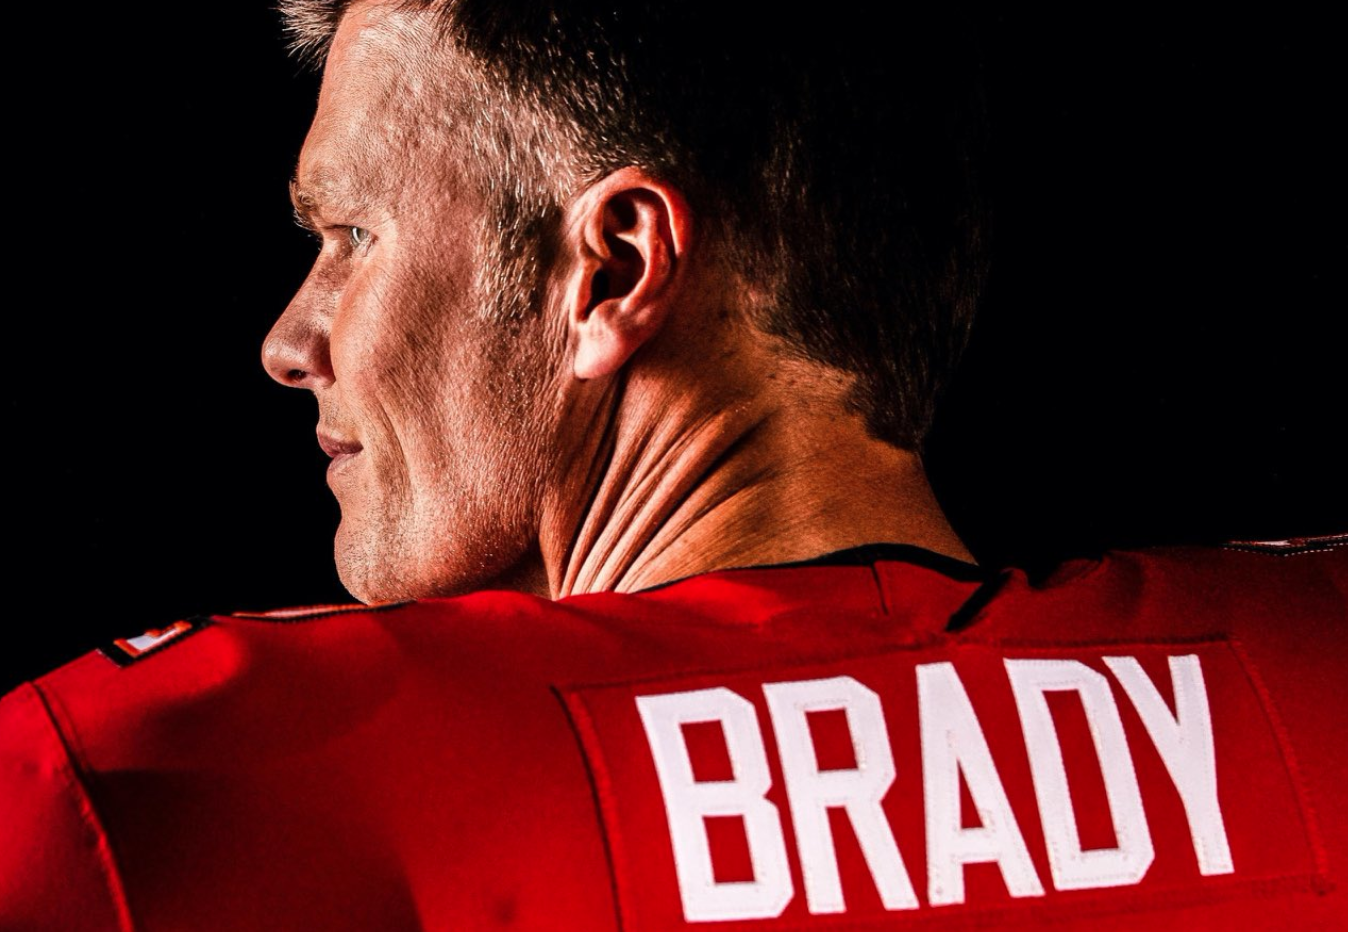 FIRST LOOK: Tampa Bay Buccaneers Reveal First Image Of A Fully Kitted Tom Brady